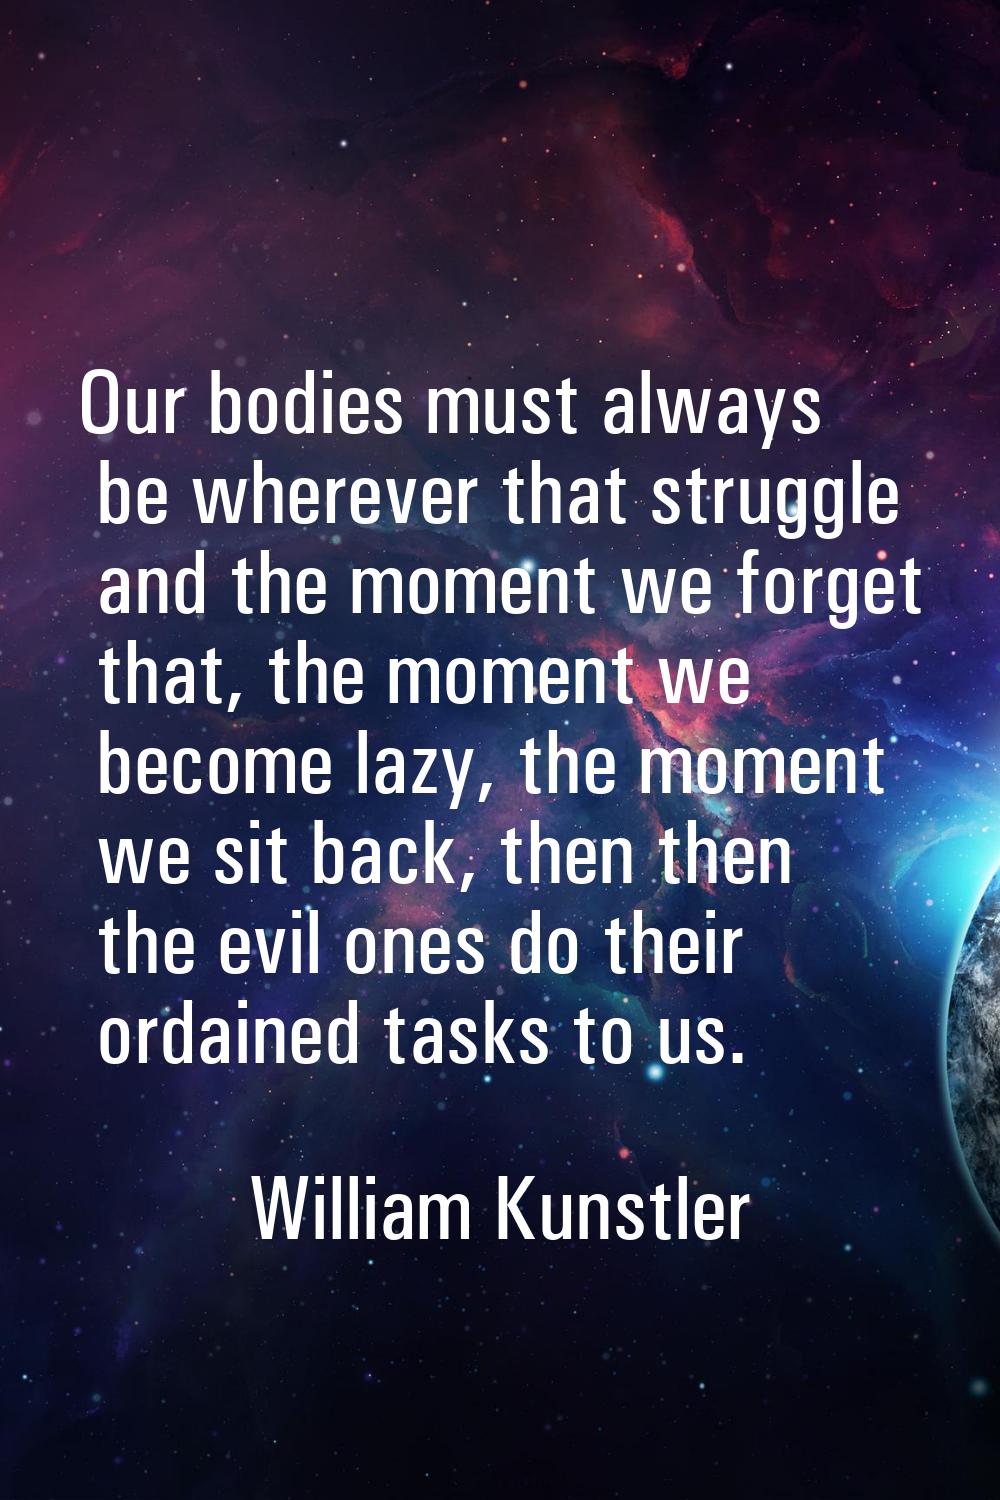 Our bodies must always be wherever that struggle and the moment we forget that, the moment we becom